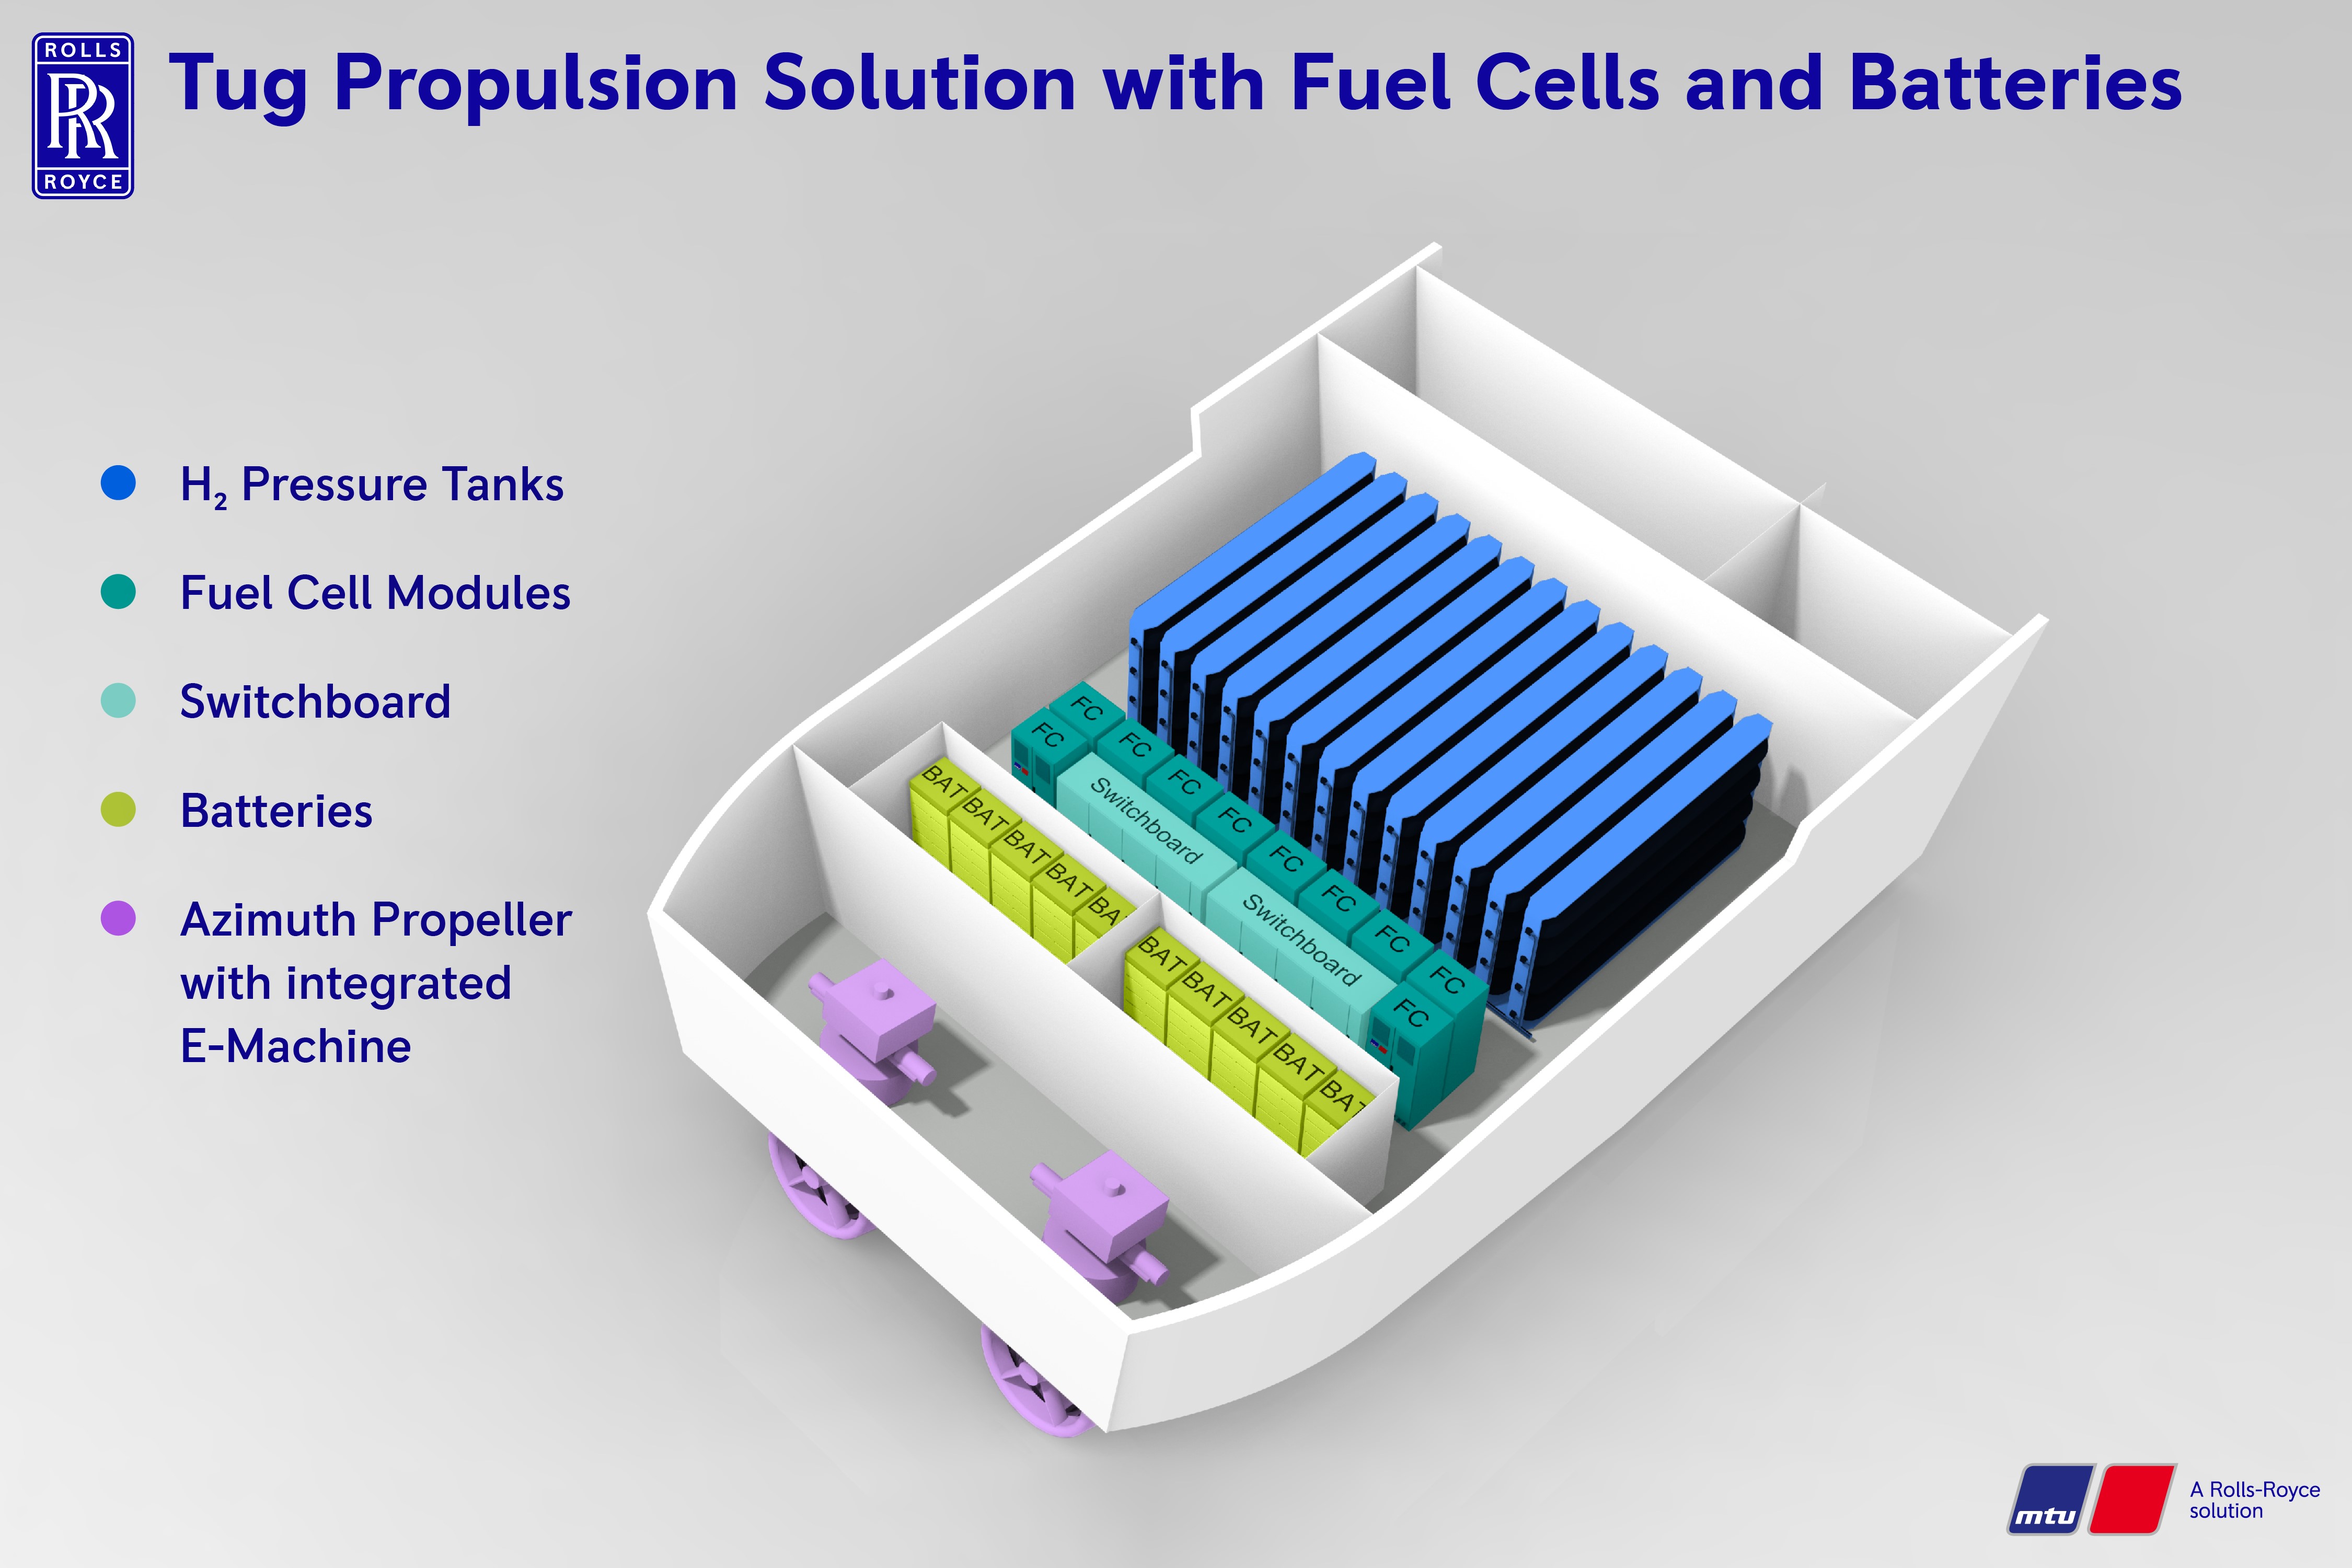 Rolls-Royce sees fuel cells as a future possibility, but not